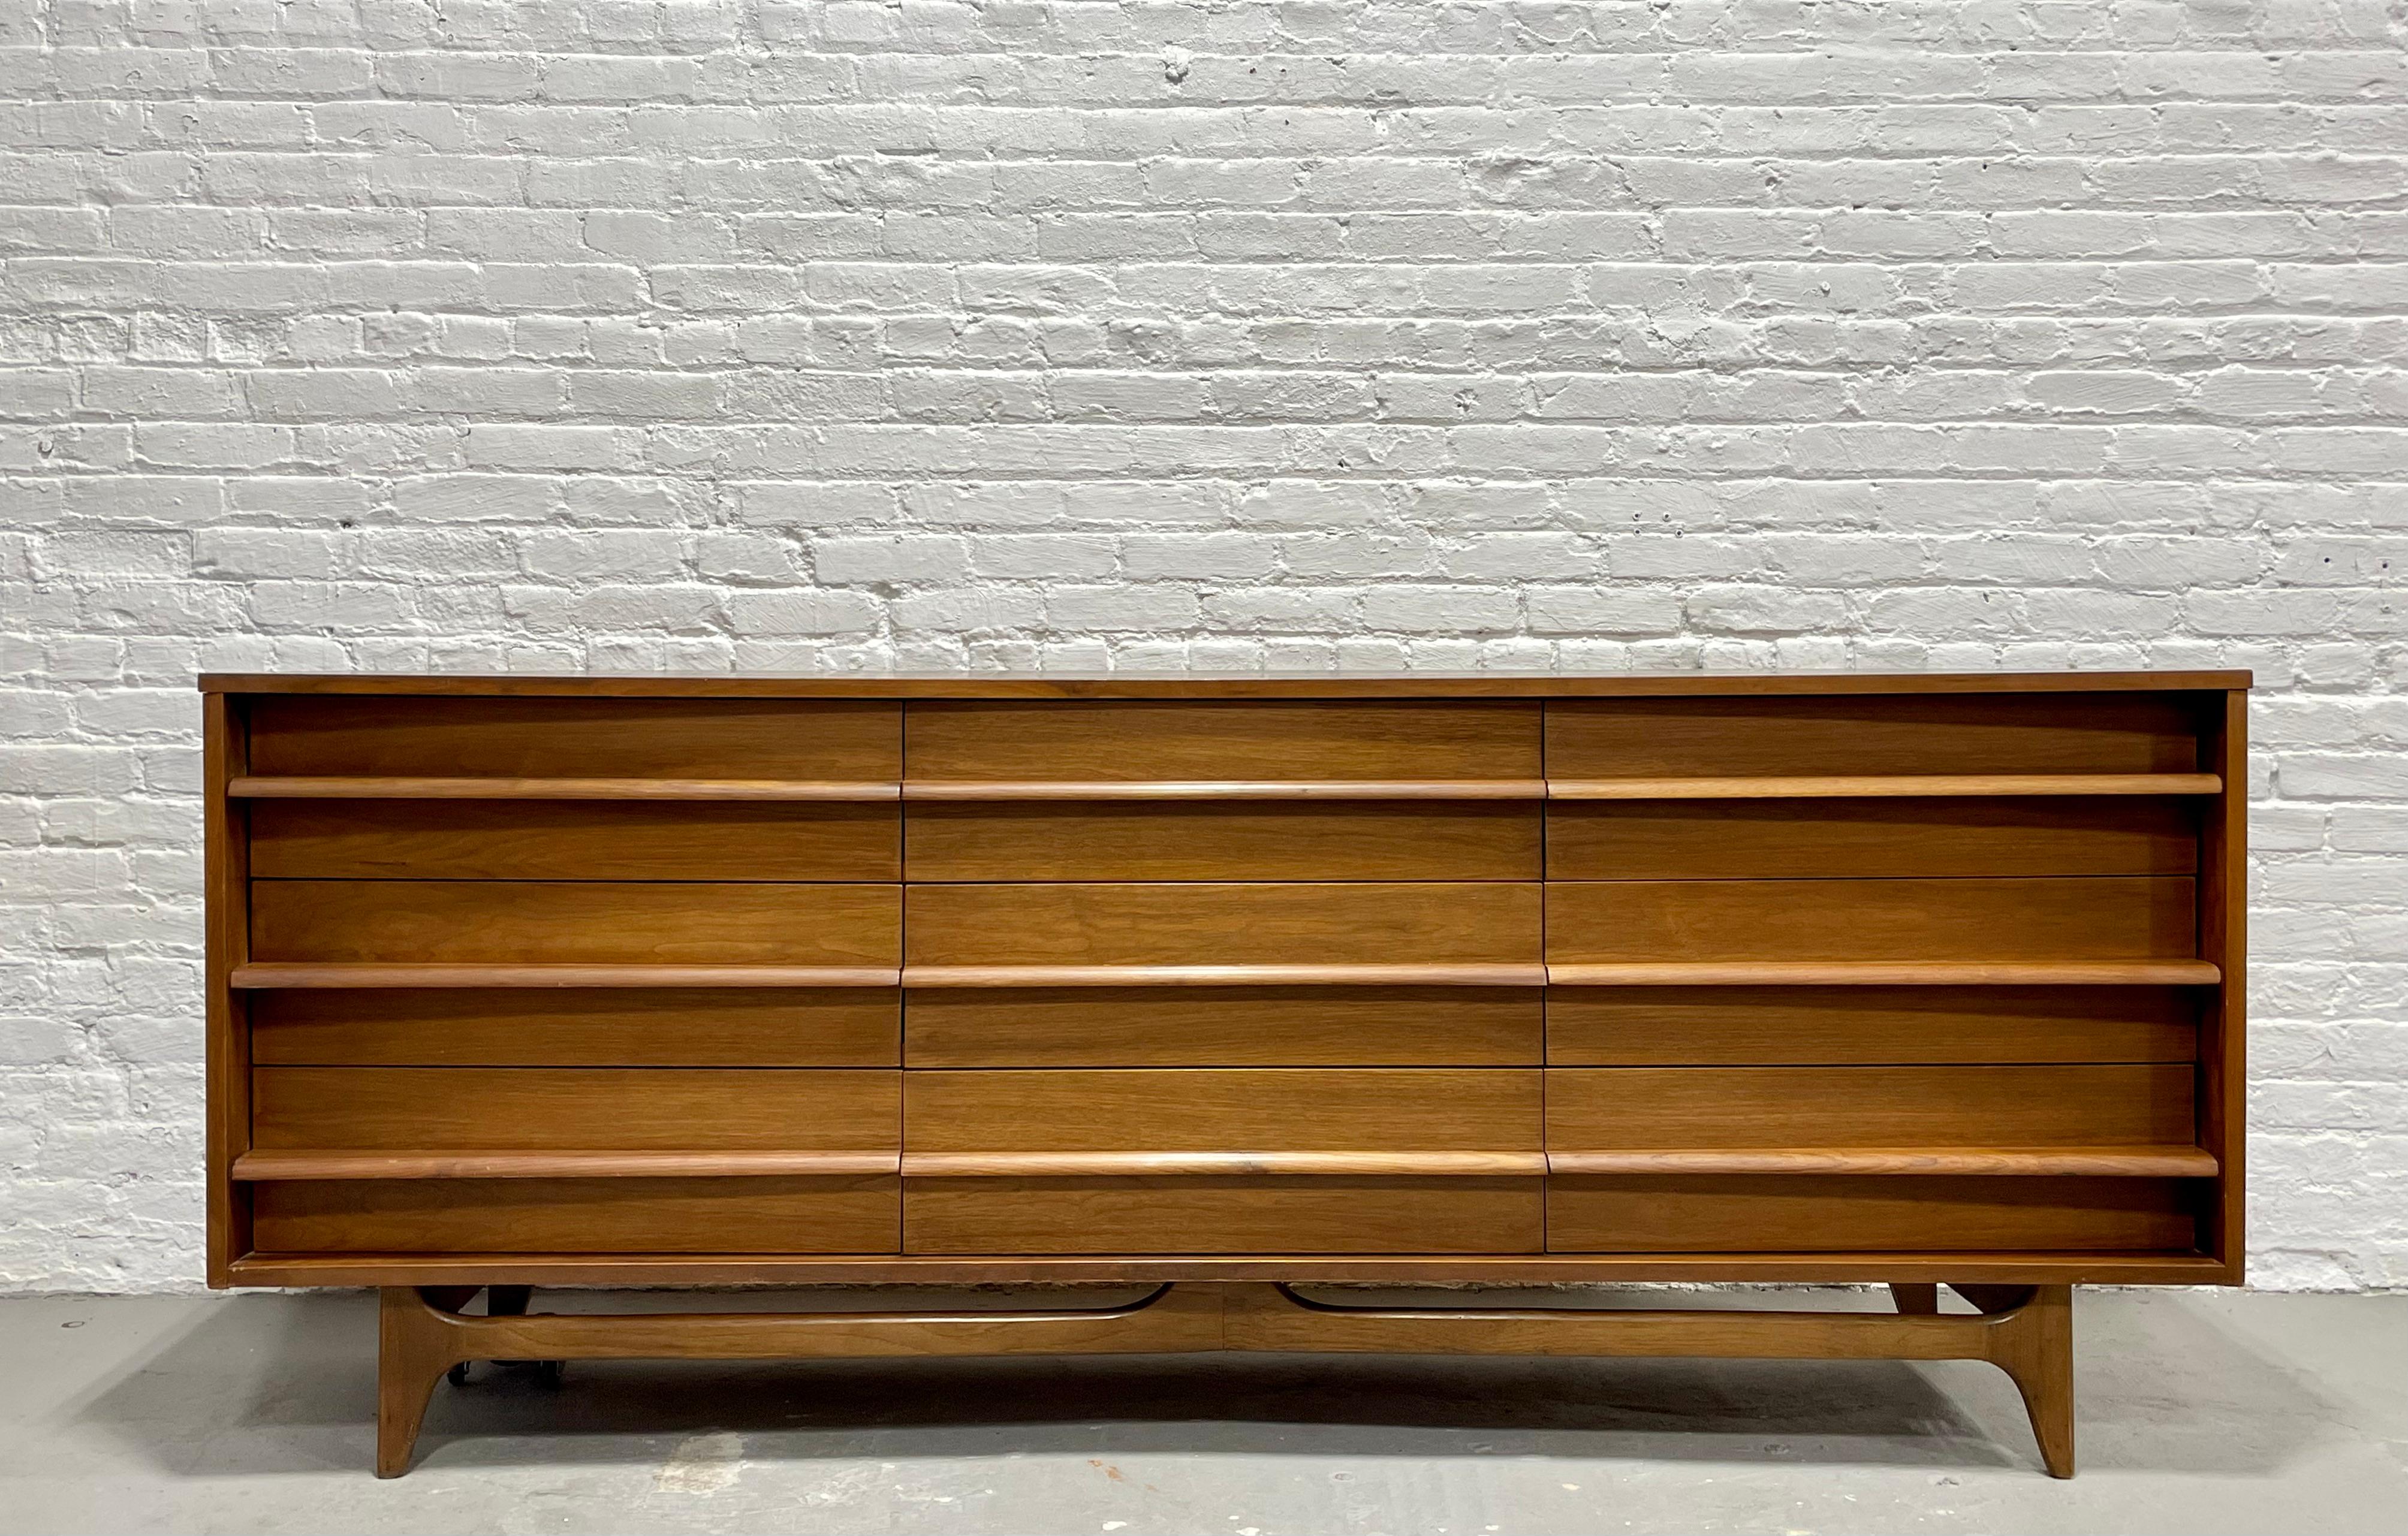 Long Walnut Mid-Century Modern Dresser / Credenza with fabulous concave facade, sculpted pulls and newly refinished tabletop. This unique long dresser offers loads of storage space - a total of NINE deep and spacious drawers running smoothly with